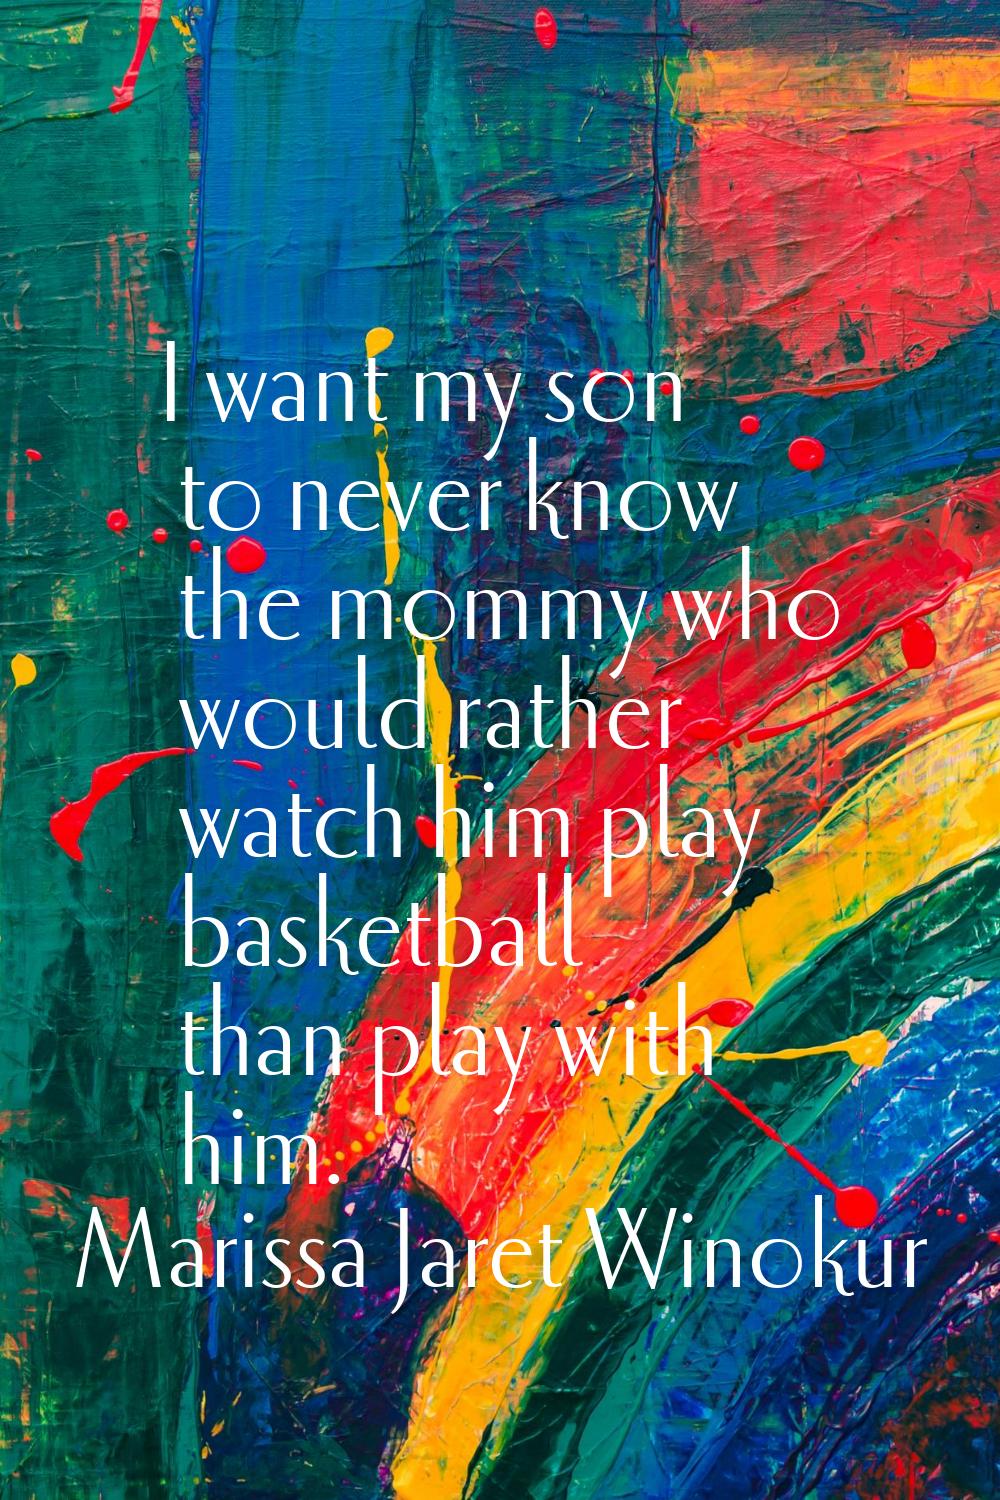 I want my son to never know the mommy who would rather watch him play basketball than play with him